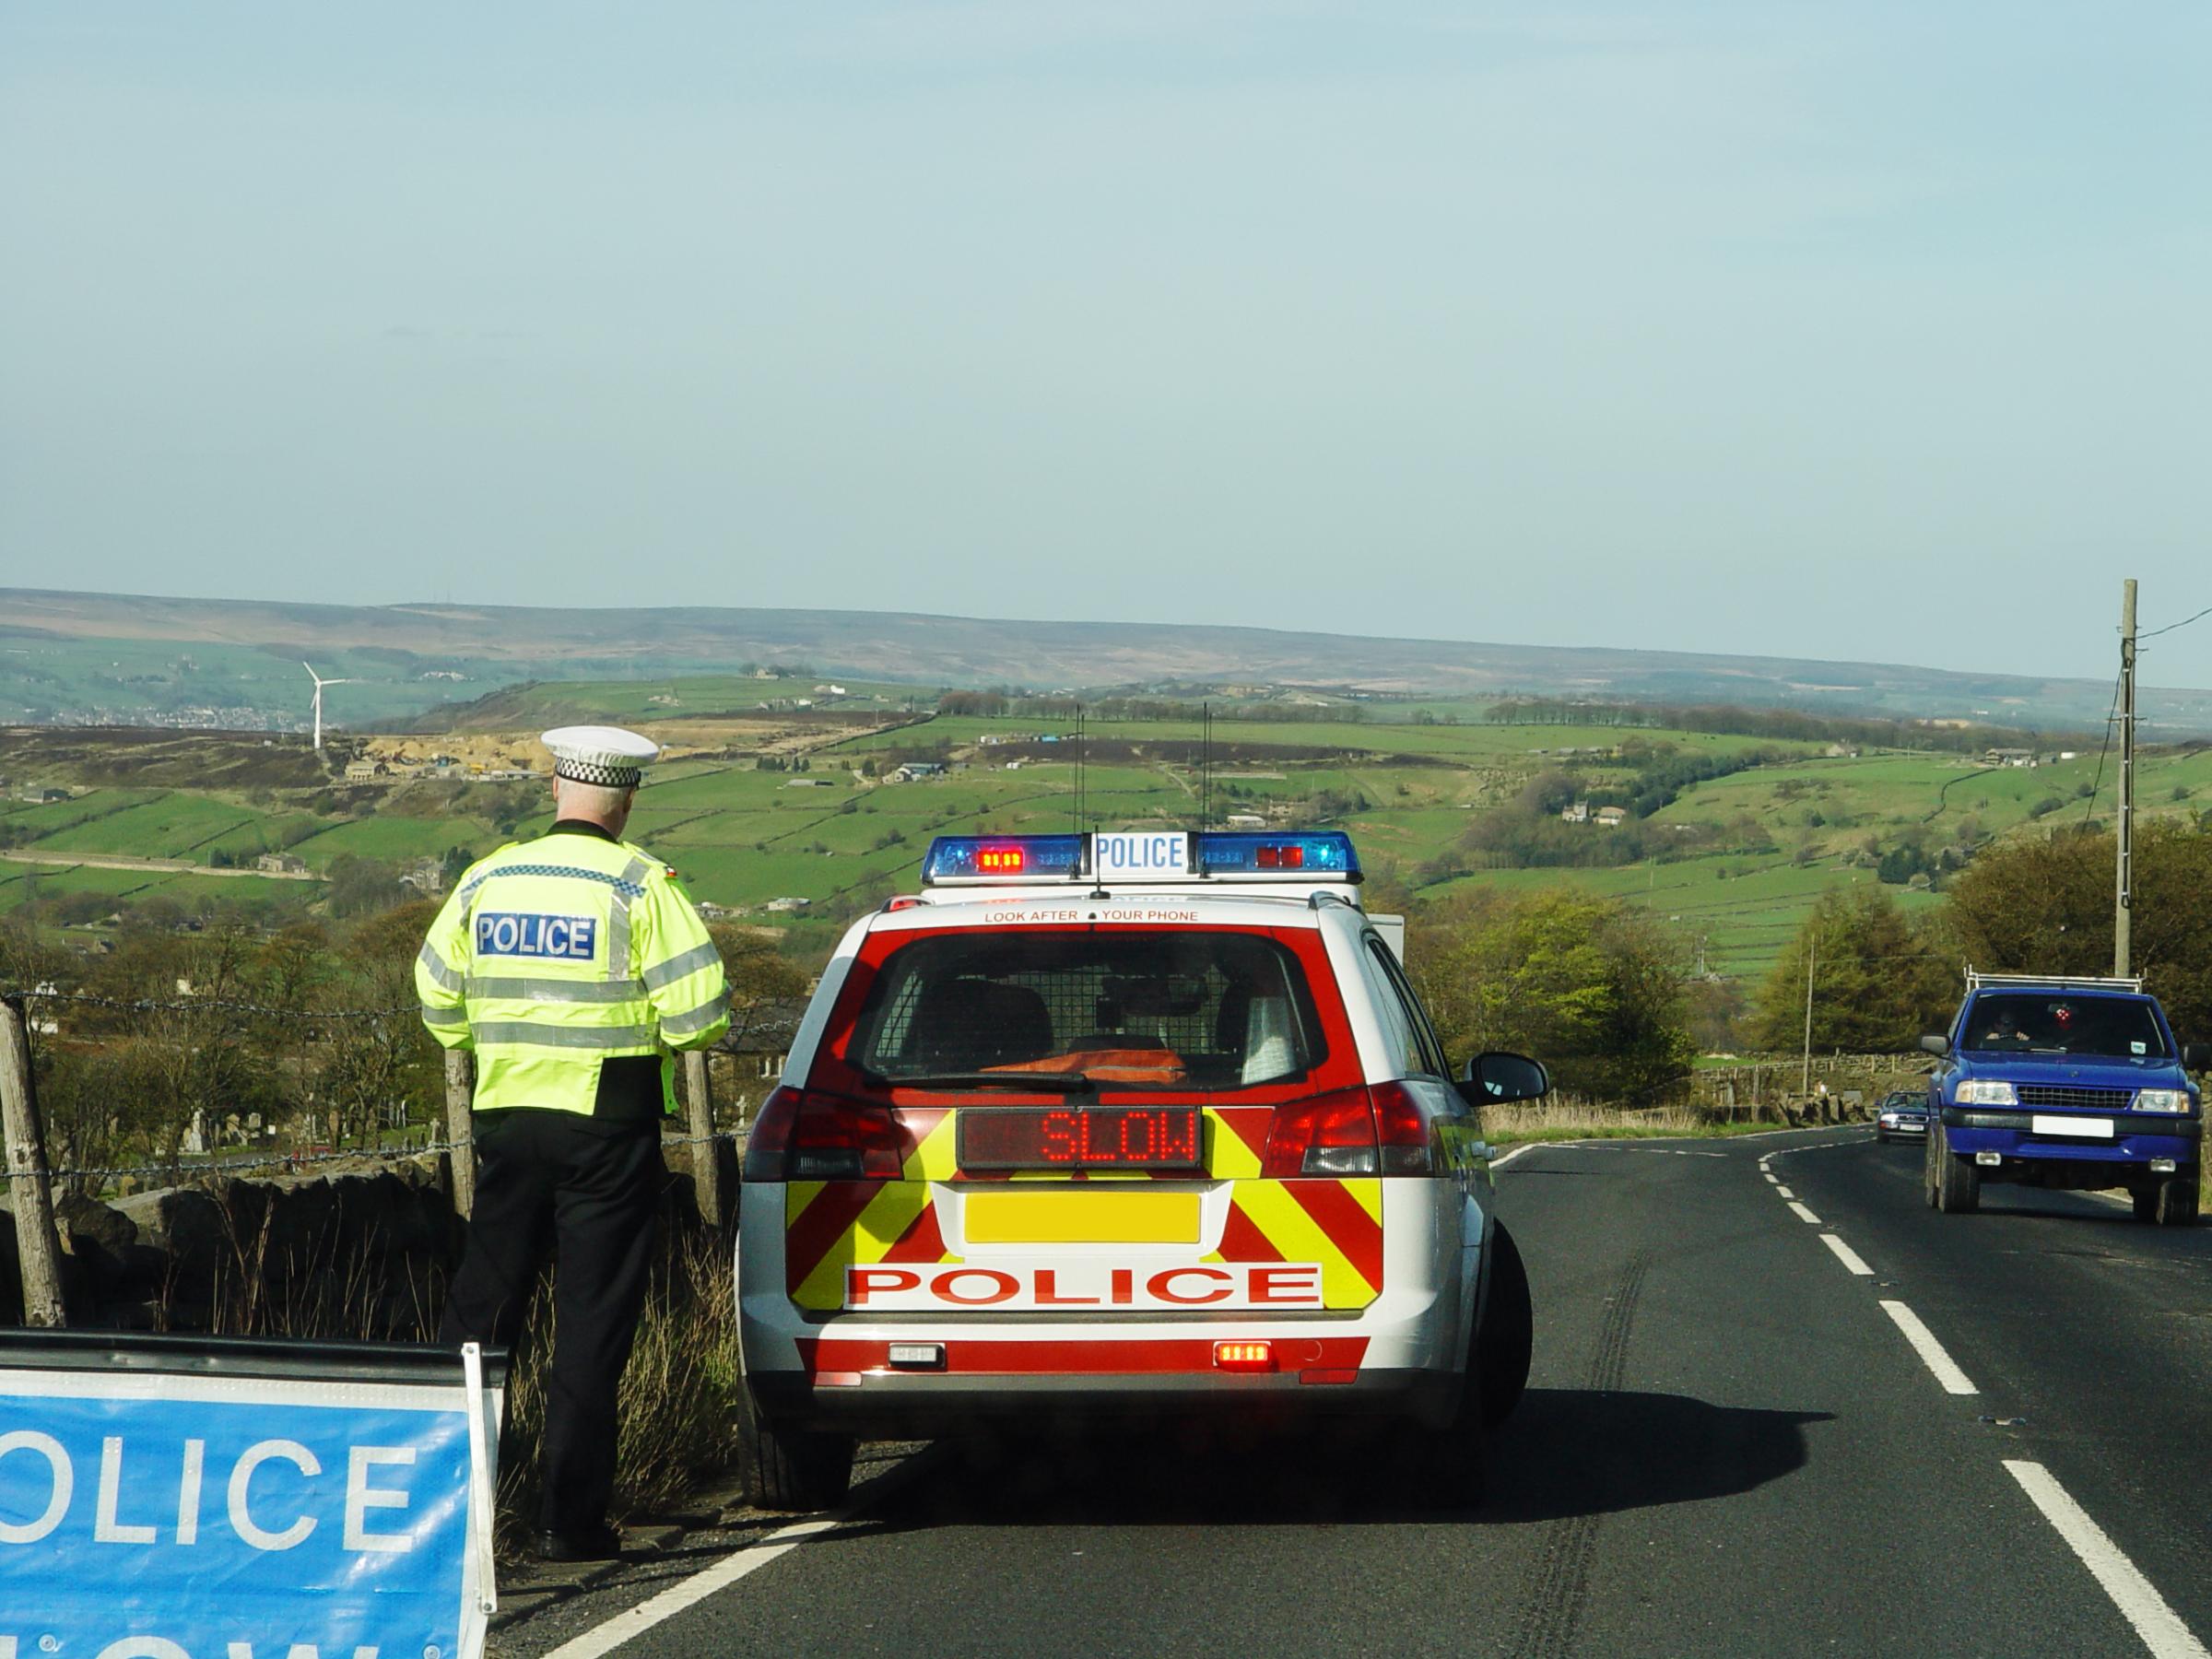 Motorcyclist seriously injured in crash on A947 Dyce to Banff road - HeraldScotland